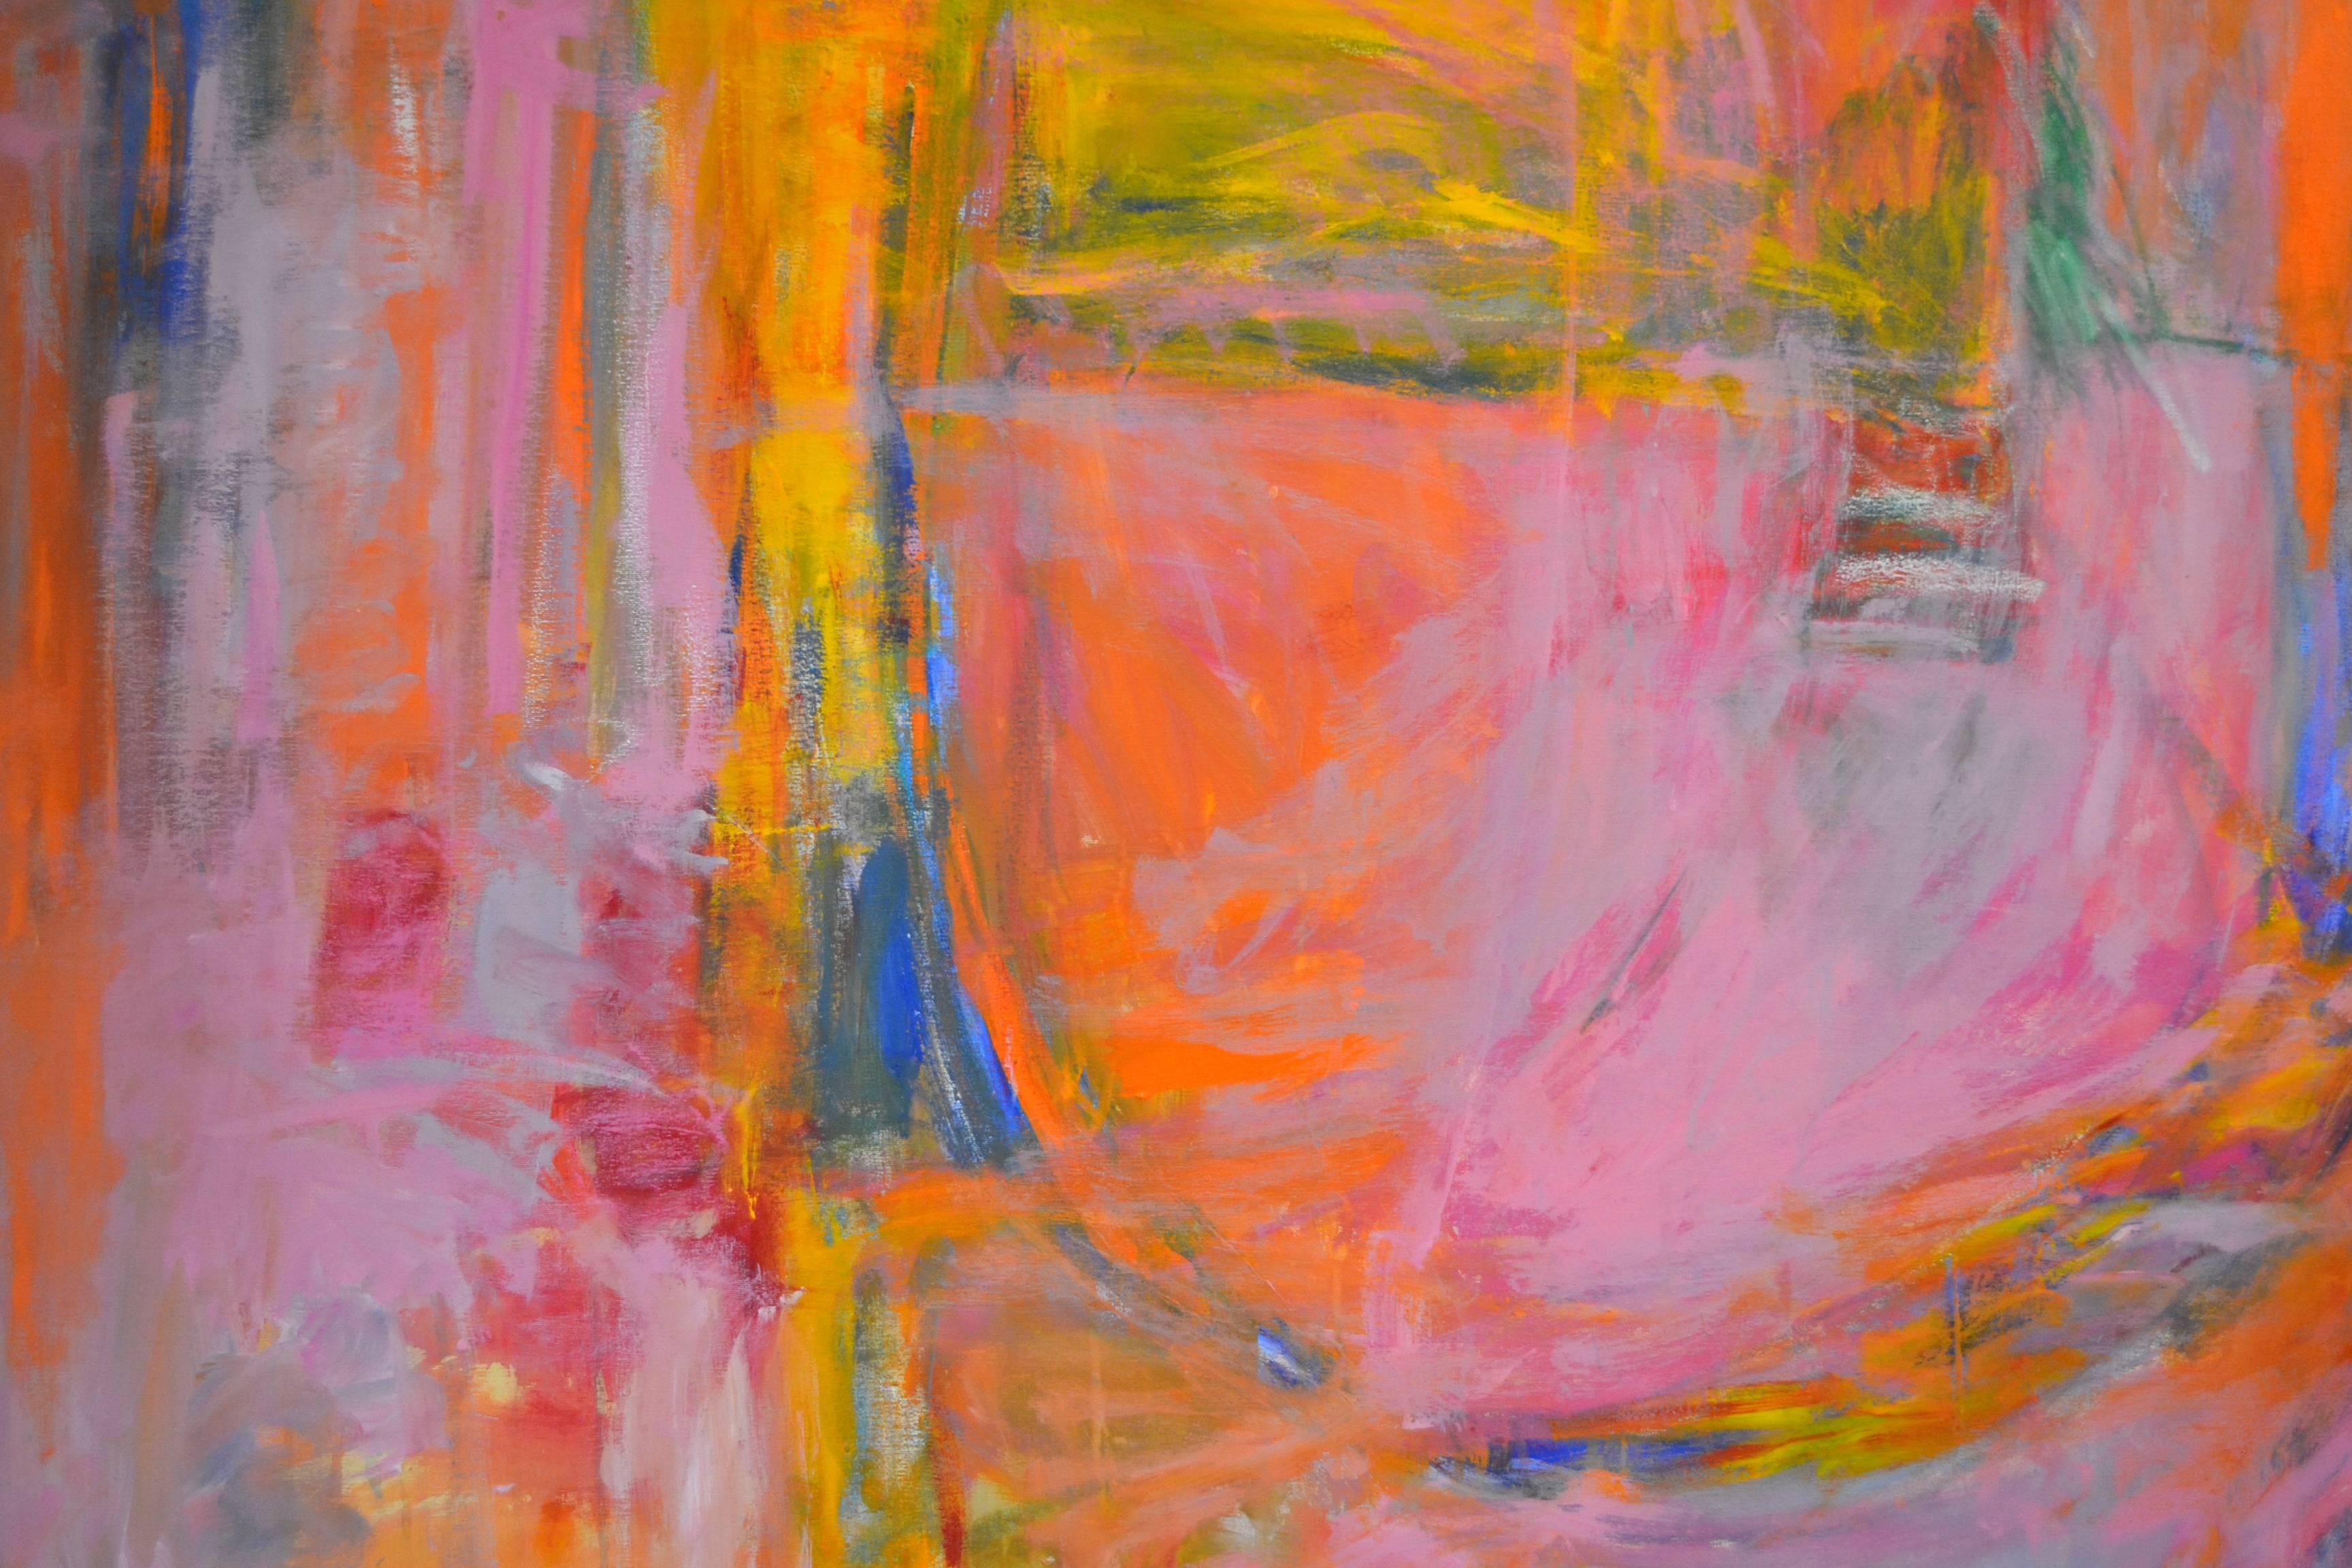 Artist Sean Young titled this painting passionate, as it represents his exuberance of life and his ongoing discovery of art. The vivid and bright pastel hues represents an enlightened sense of awareness. 

After years of living and studying art in